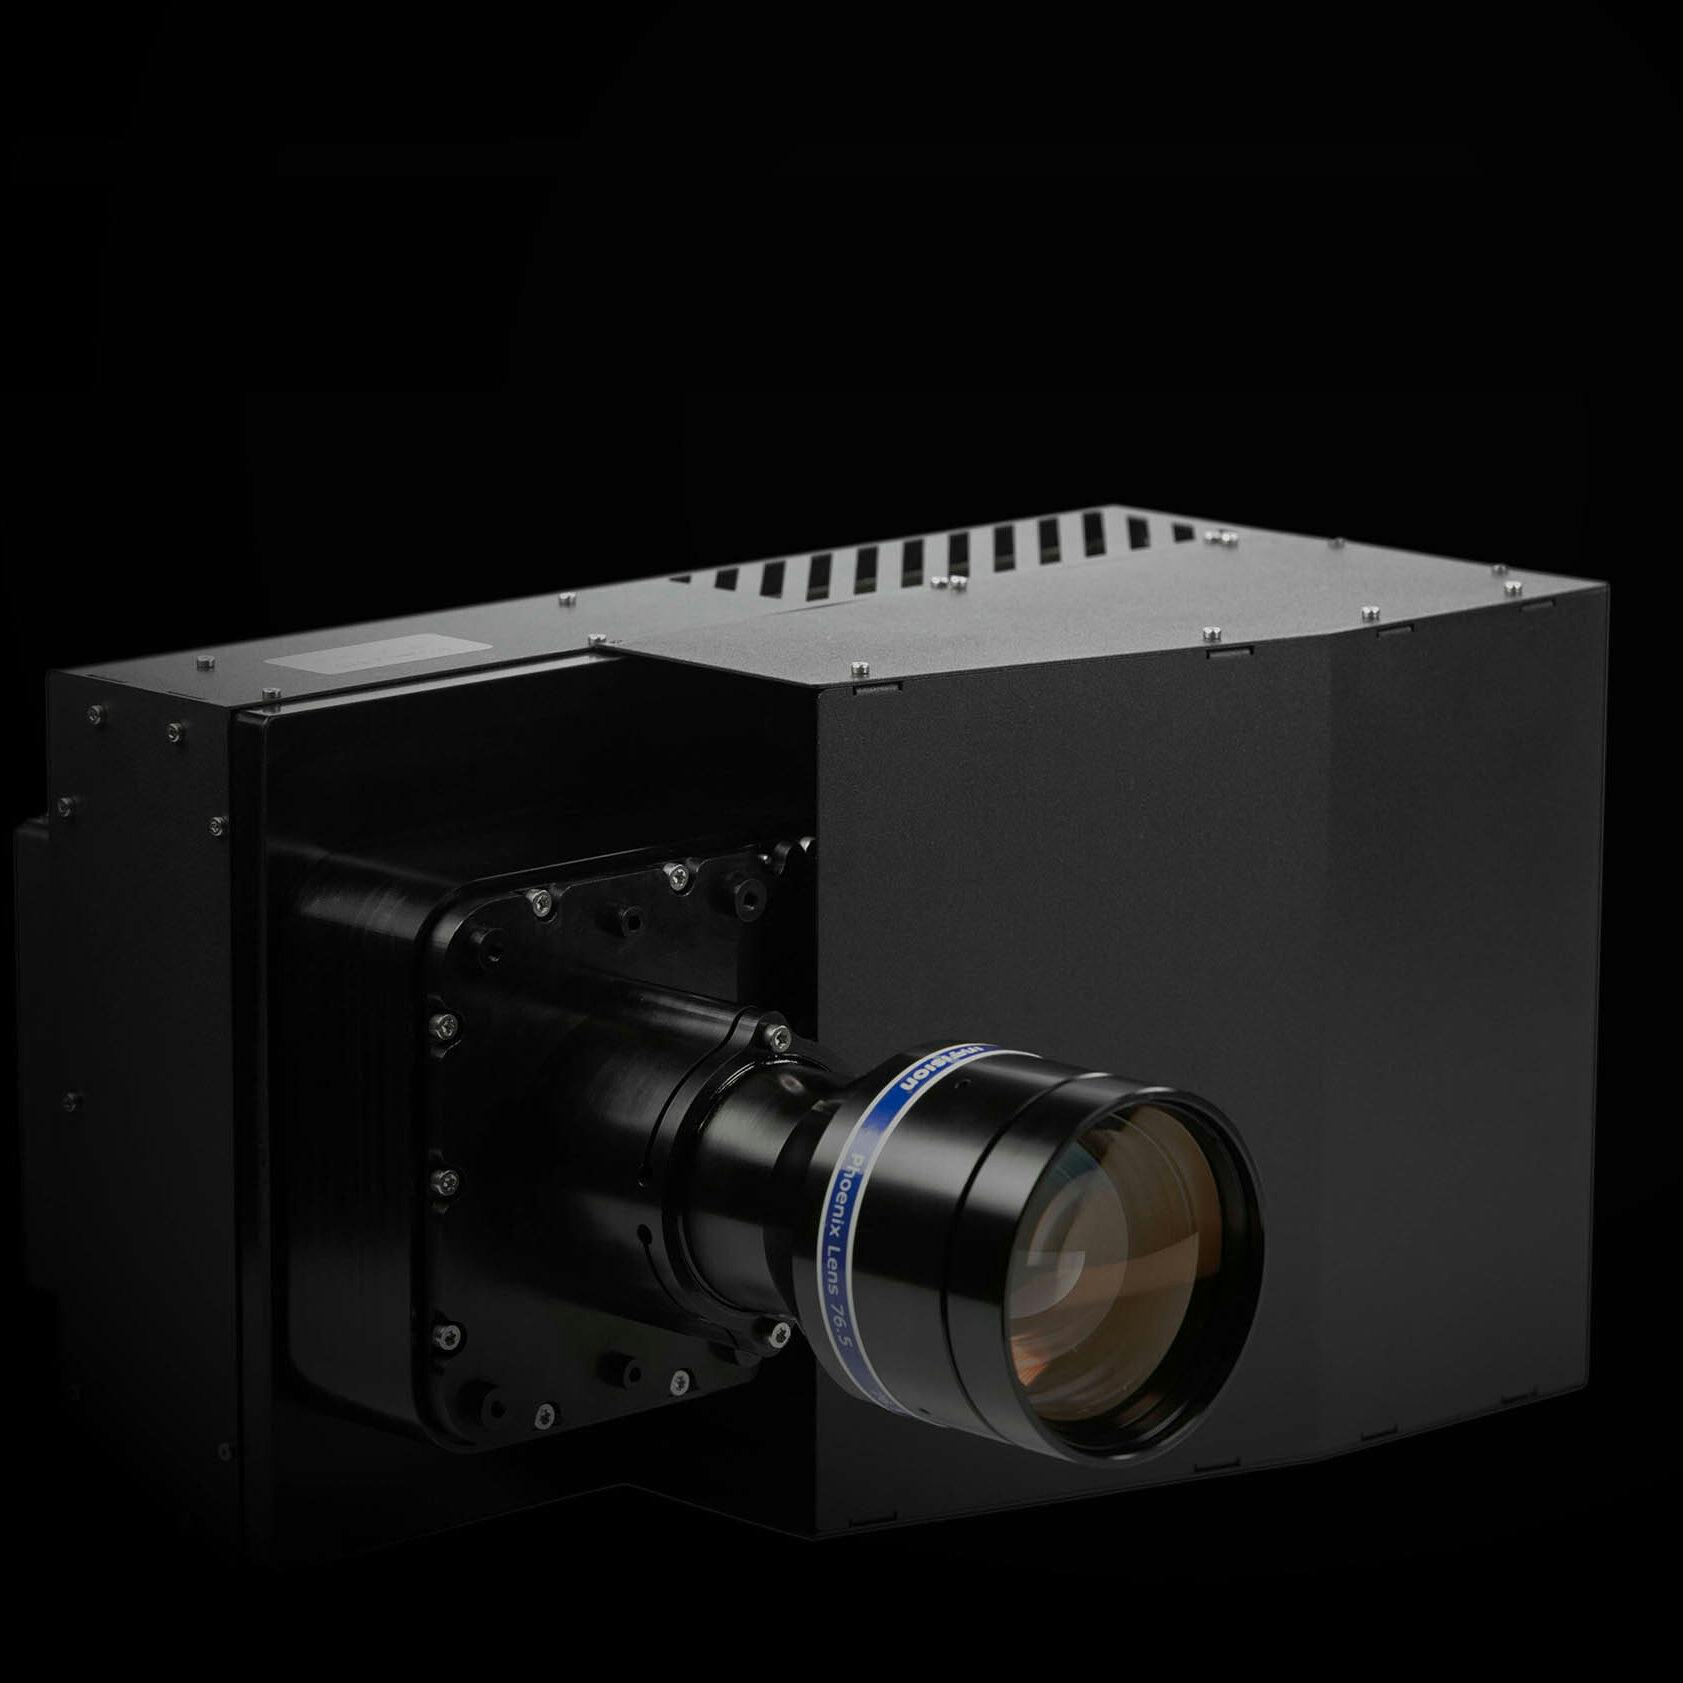 Phoenix is the first industrial 4K UV light engine. Its available as 405nm 4k UV projector and also for other wavelenght.